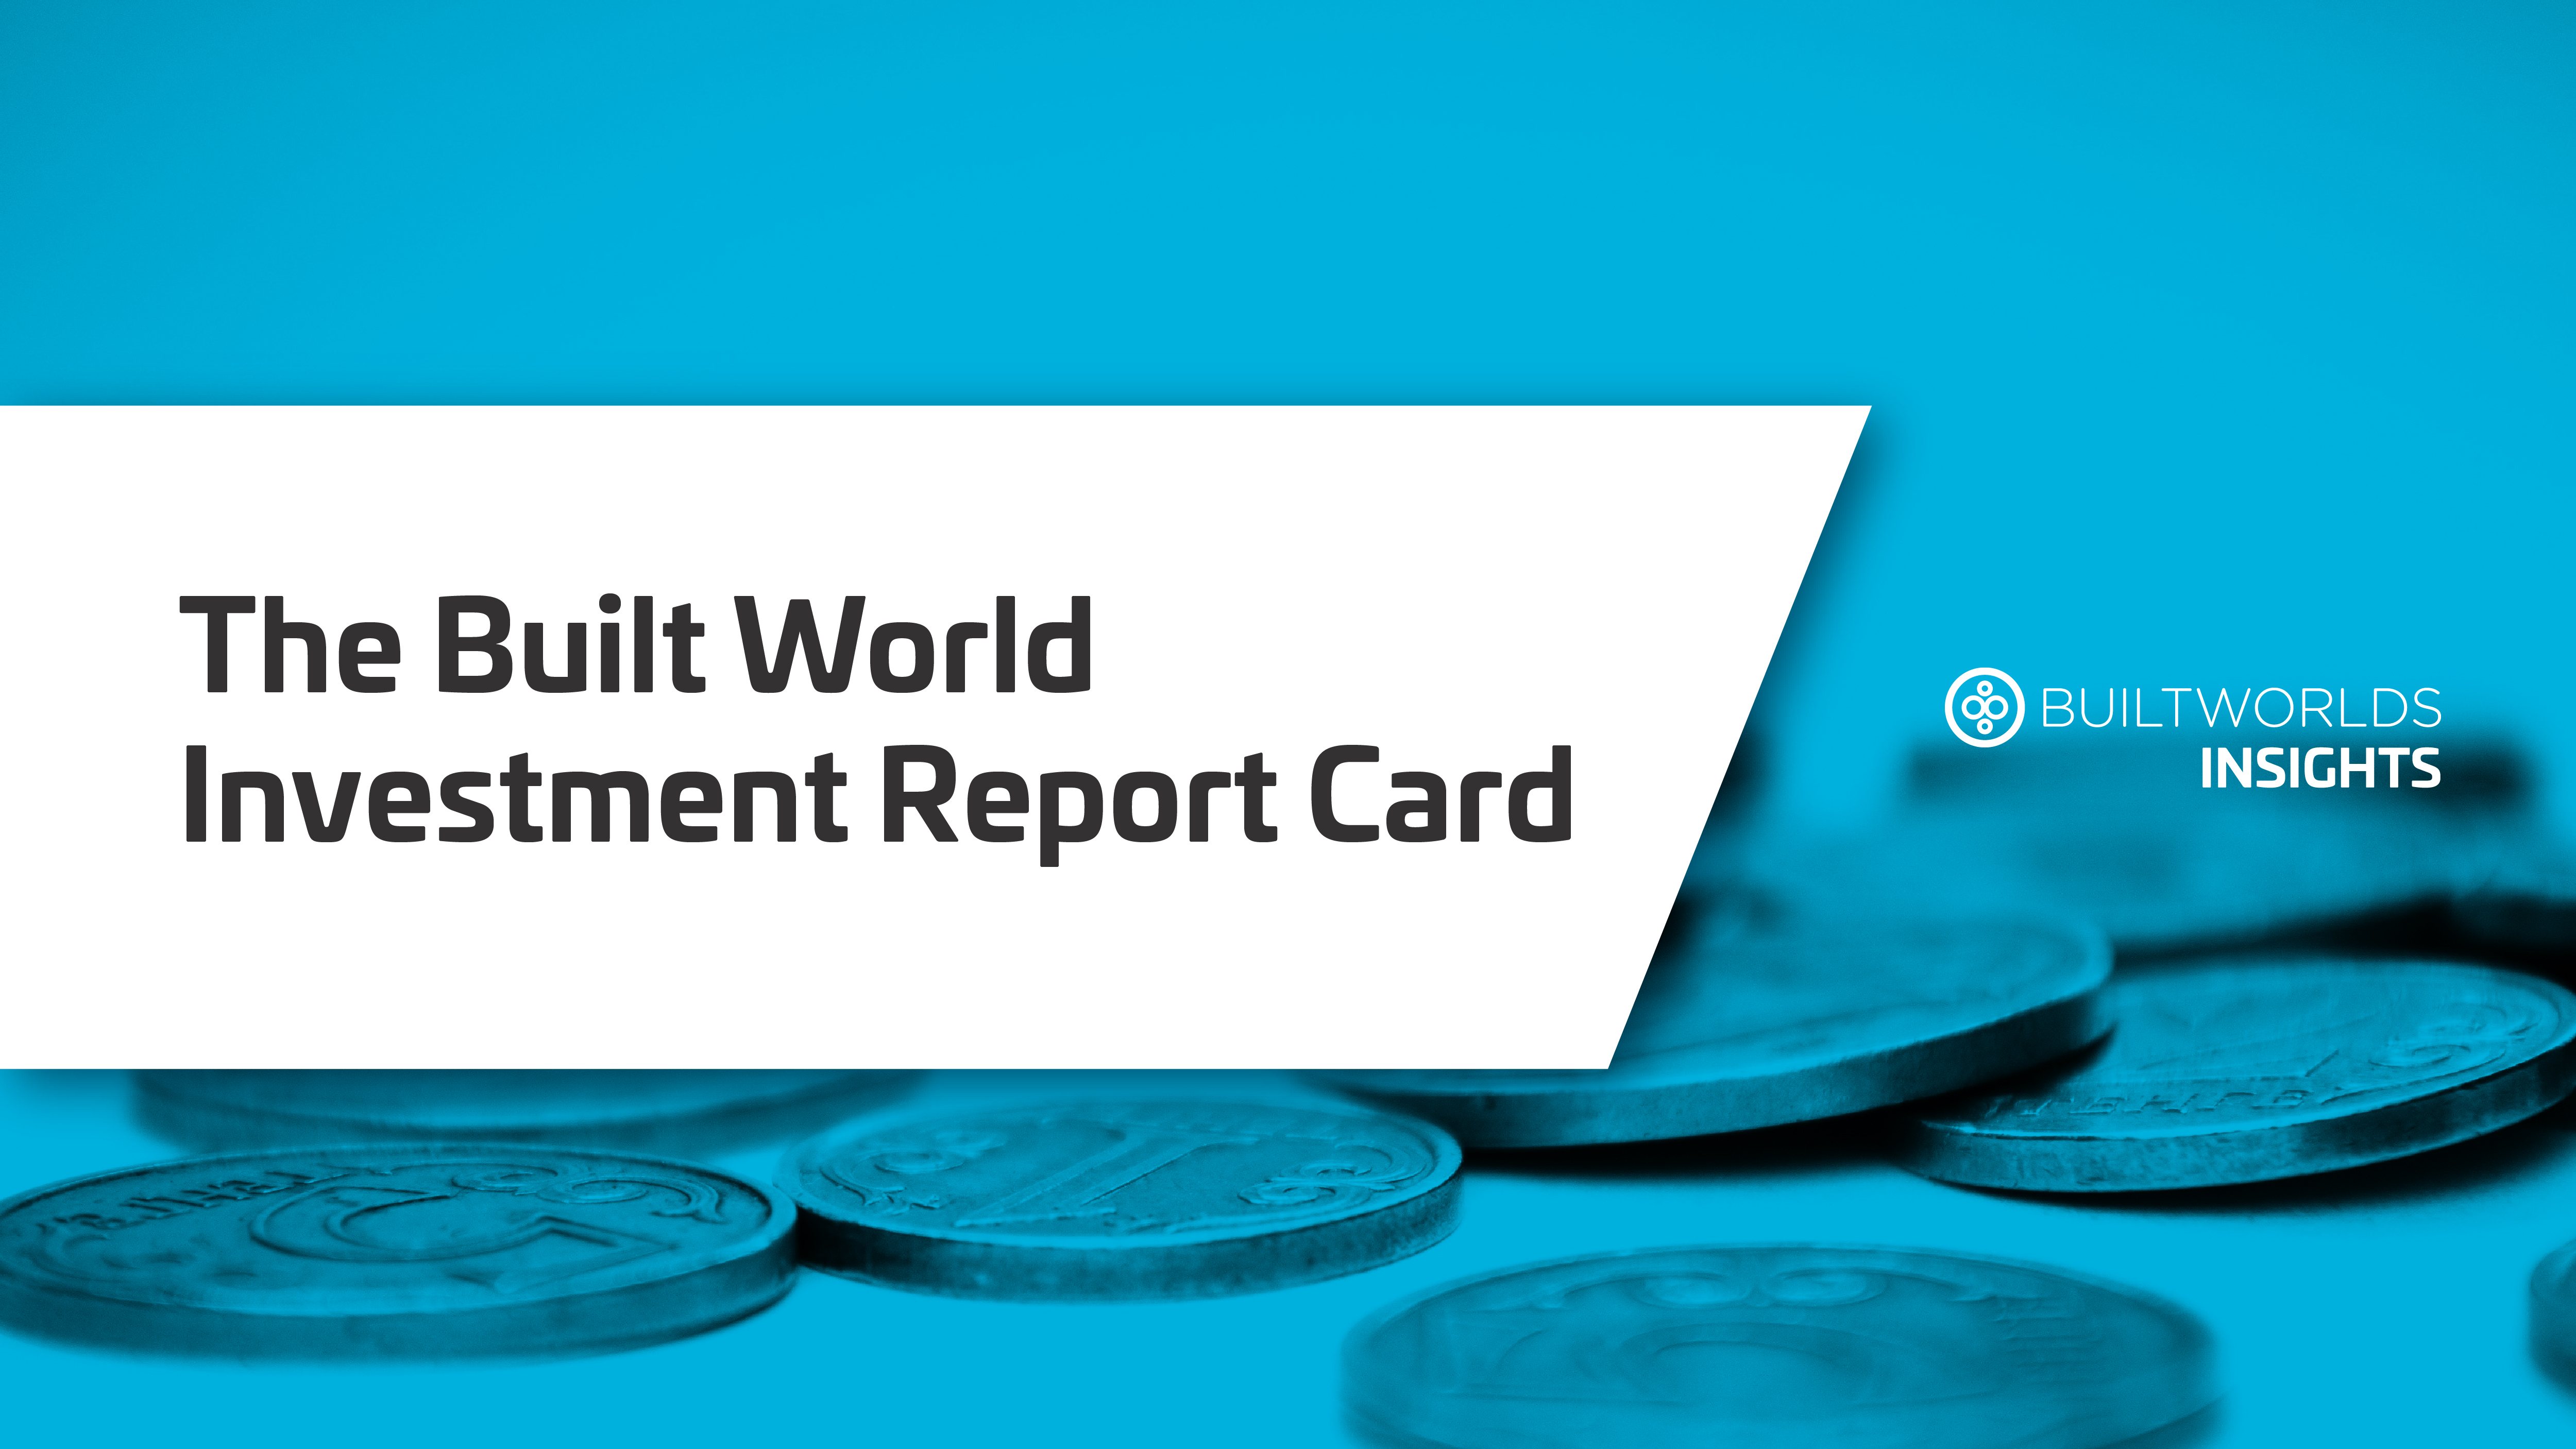 The Built World Investment Report Card